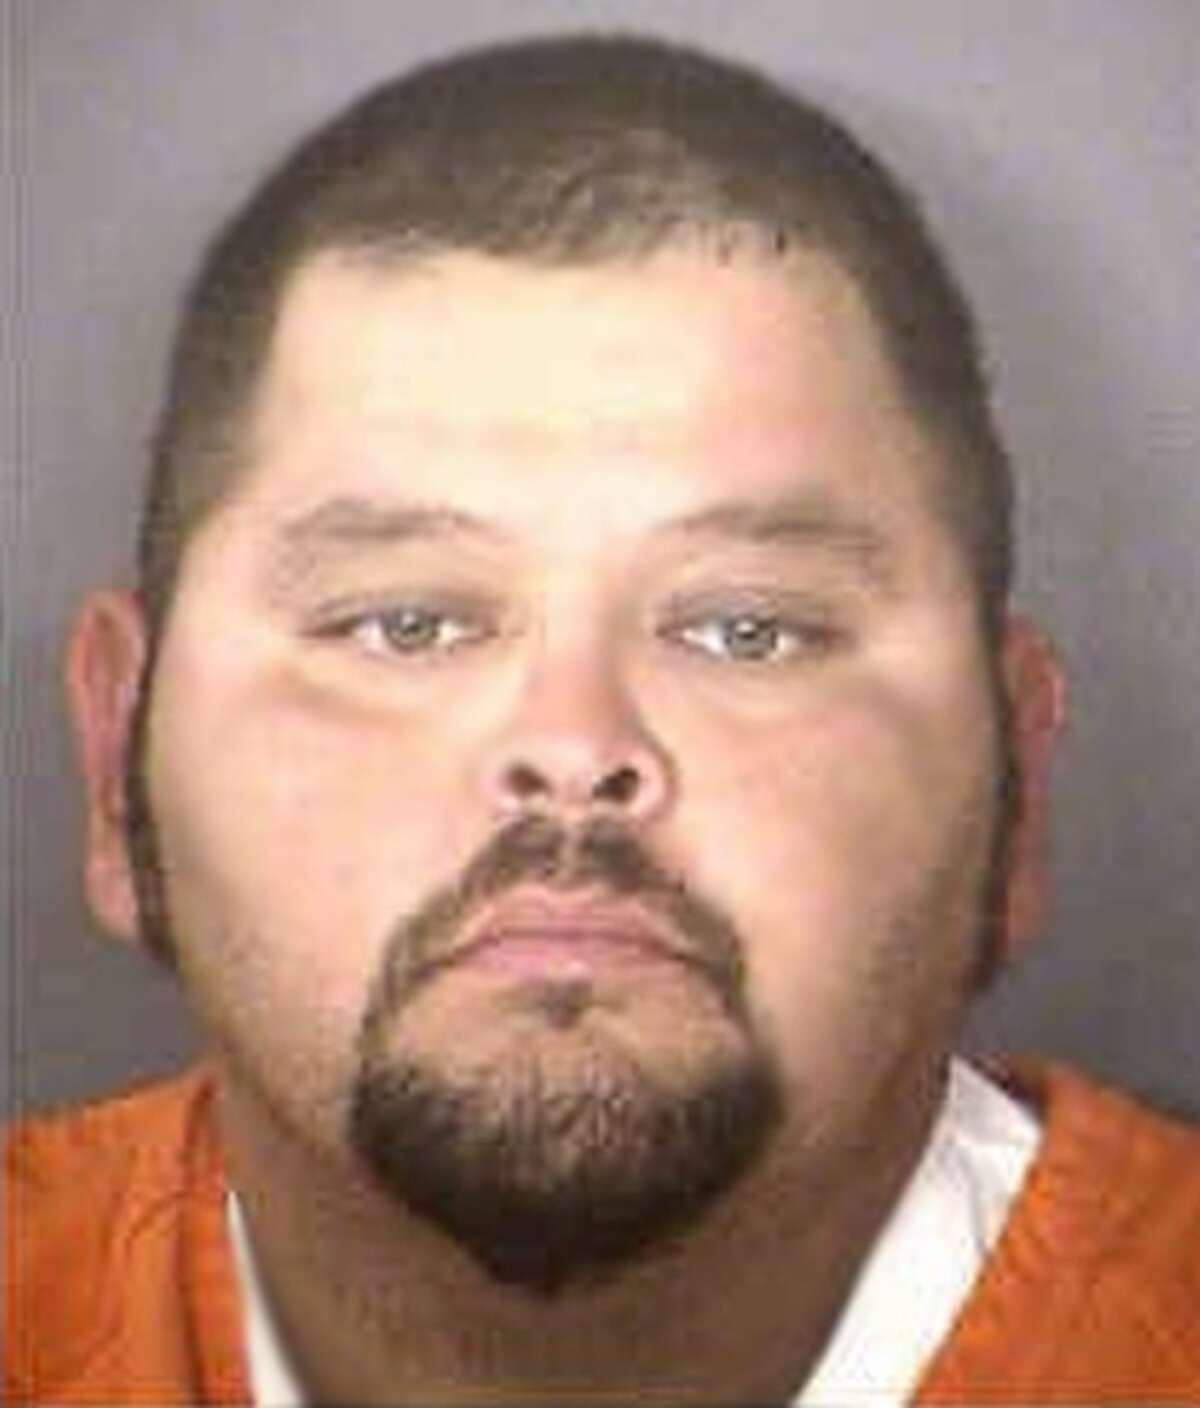 Arturo Noriega, 35, faces one count of intoxication manslaughter after he reportedly crashed into Richard Casas' Honda, killing him, on the South Side.